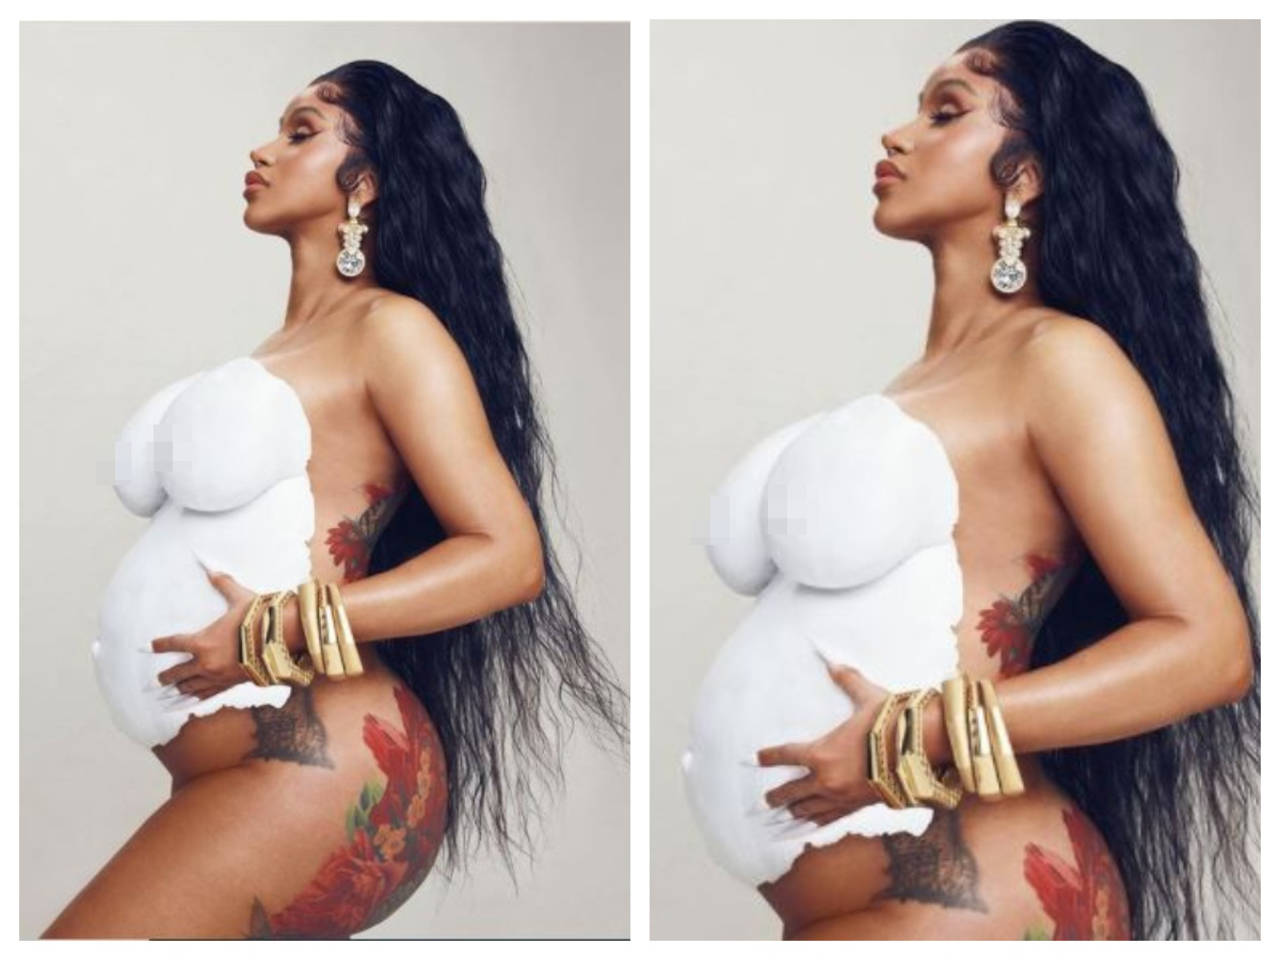 Cardi B announces second pregnancy with husband Offset; strips down for stunning photoshoot 